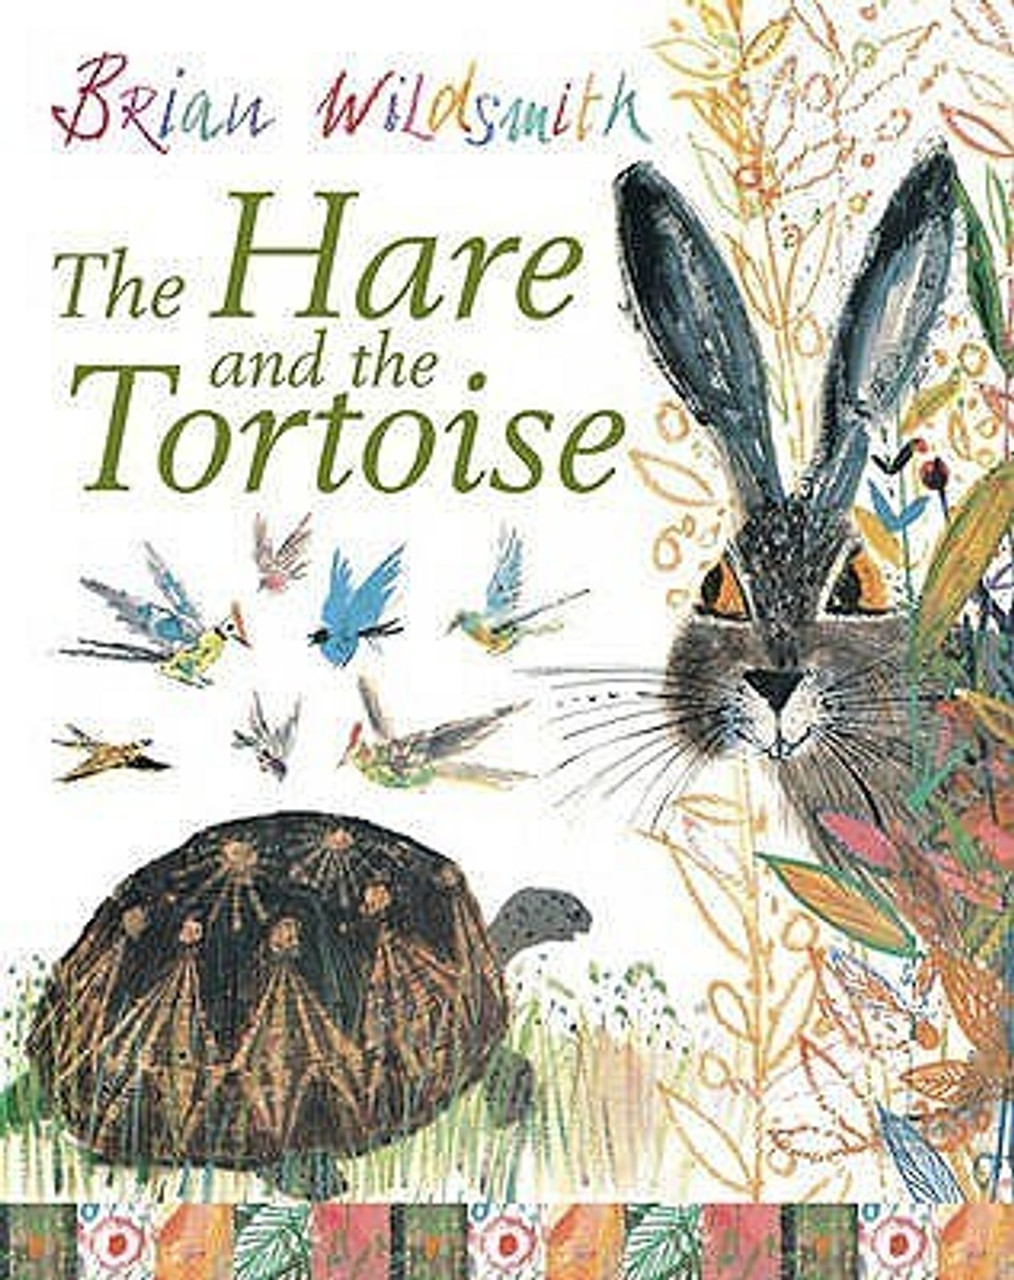 Brian Wildsmith / The Hare and the Tortoise (Children's Picture Book)